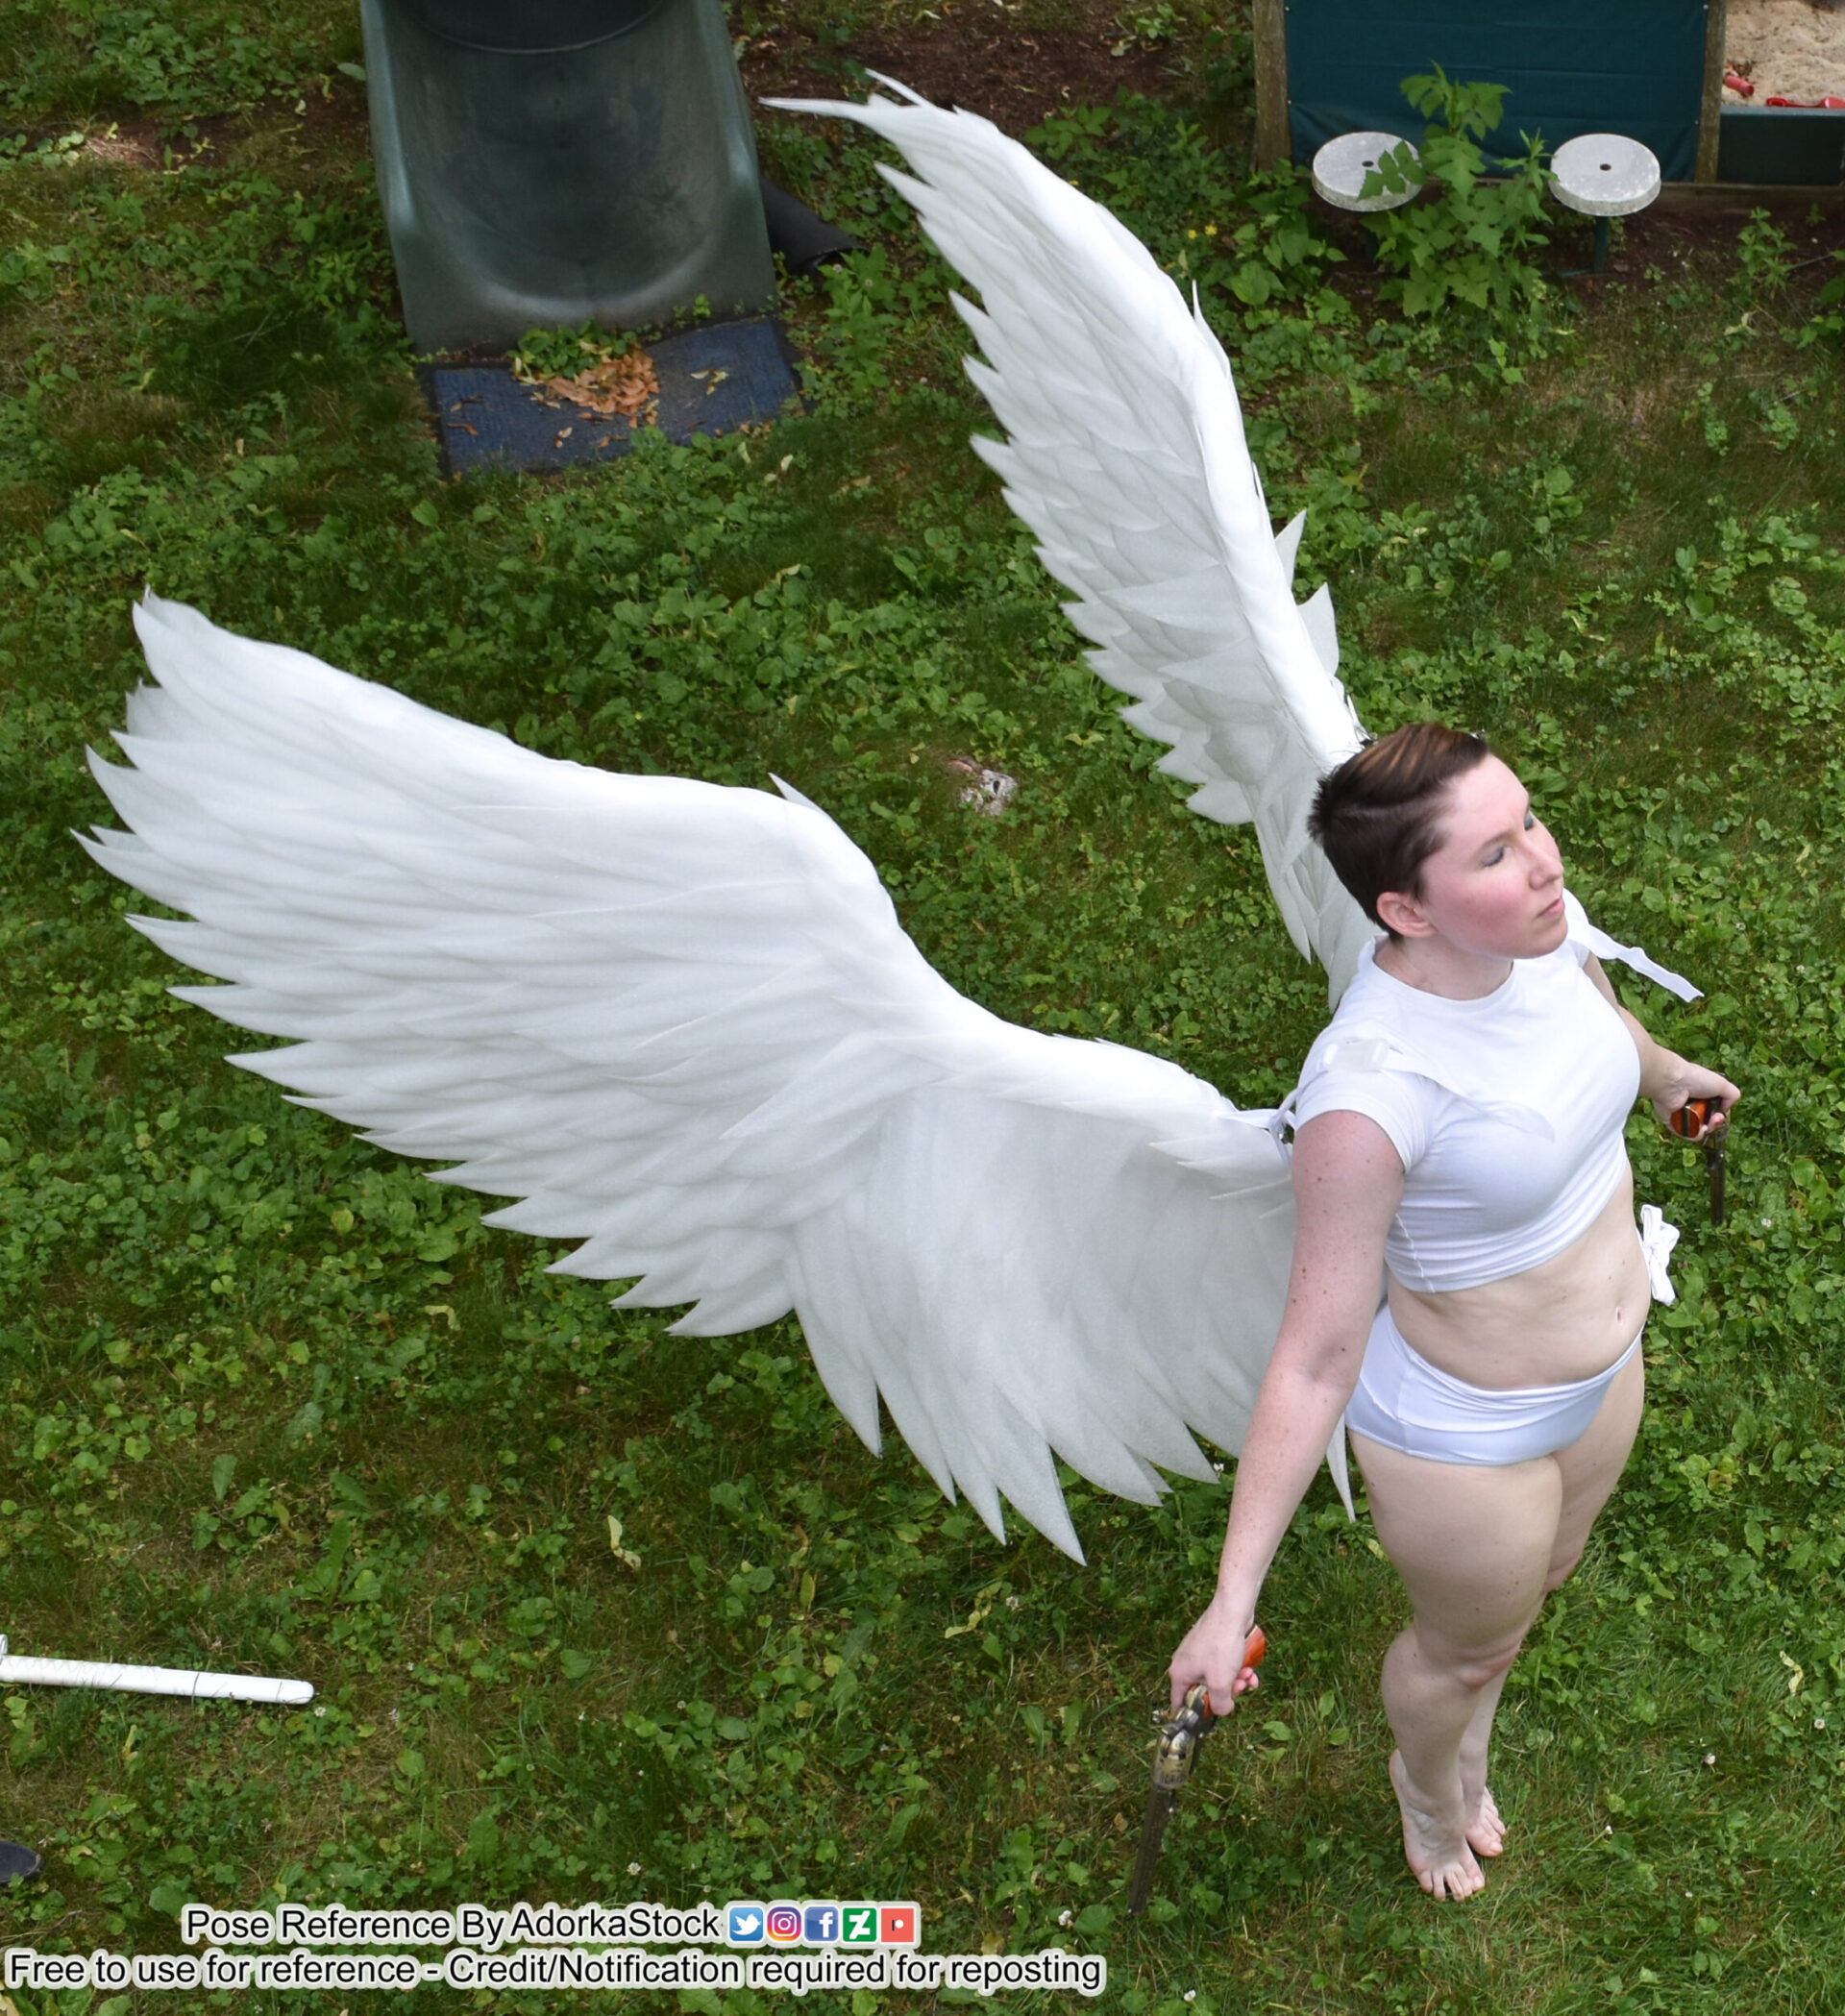 thin, white, female pose reference model in high perspective standing pose with huge wings, arms to her side, on tip toes